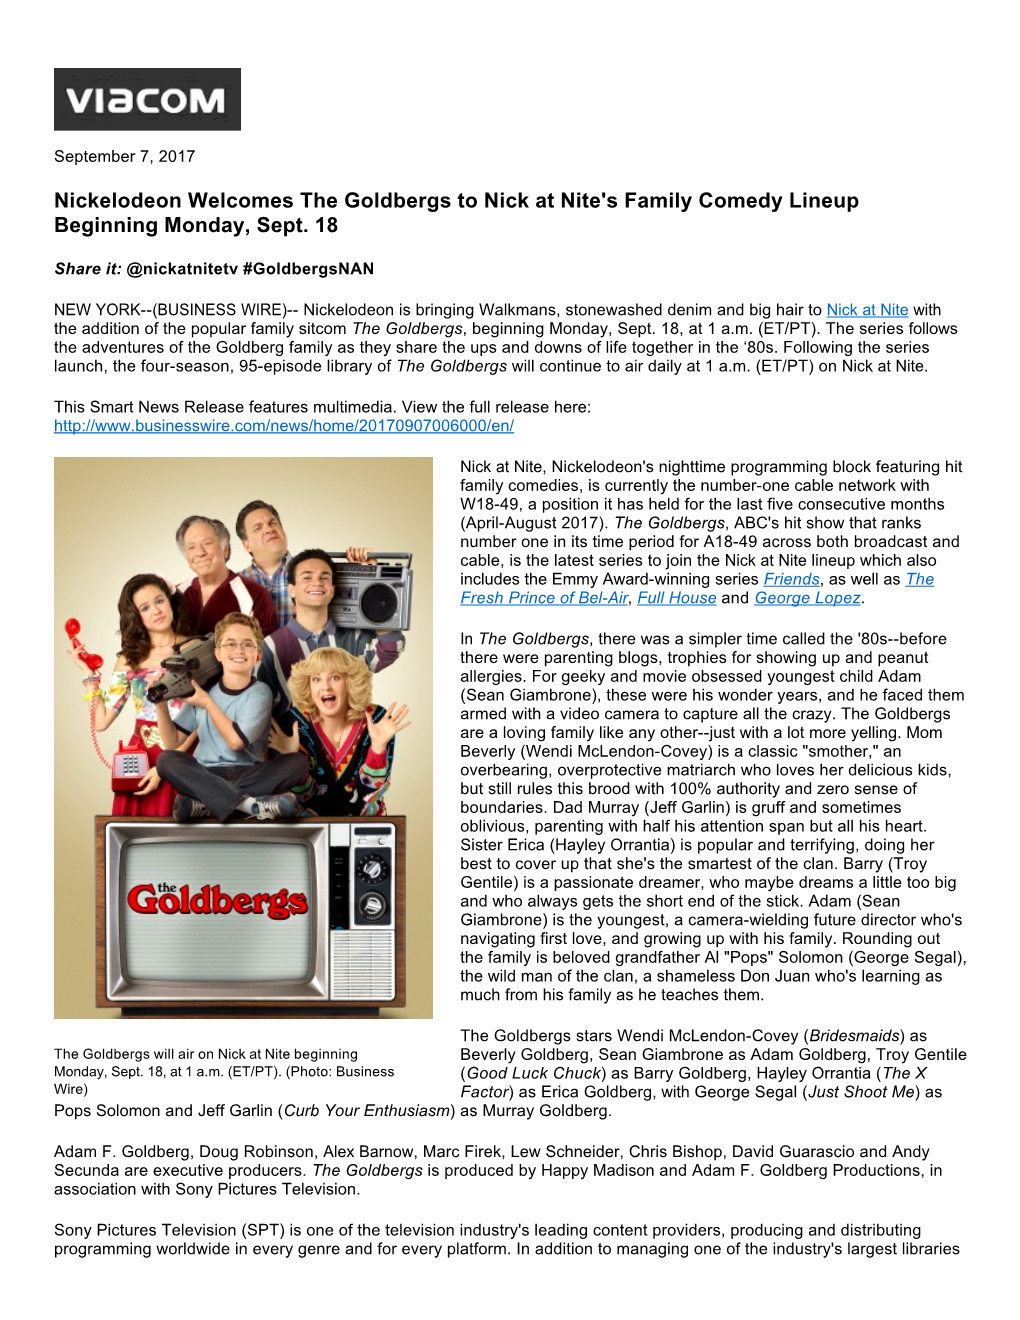 Nickelodeon Welcomes the Goldbergs to Nick at Nite's Family Comedy Lineup Beginning Monday, Sept